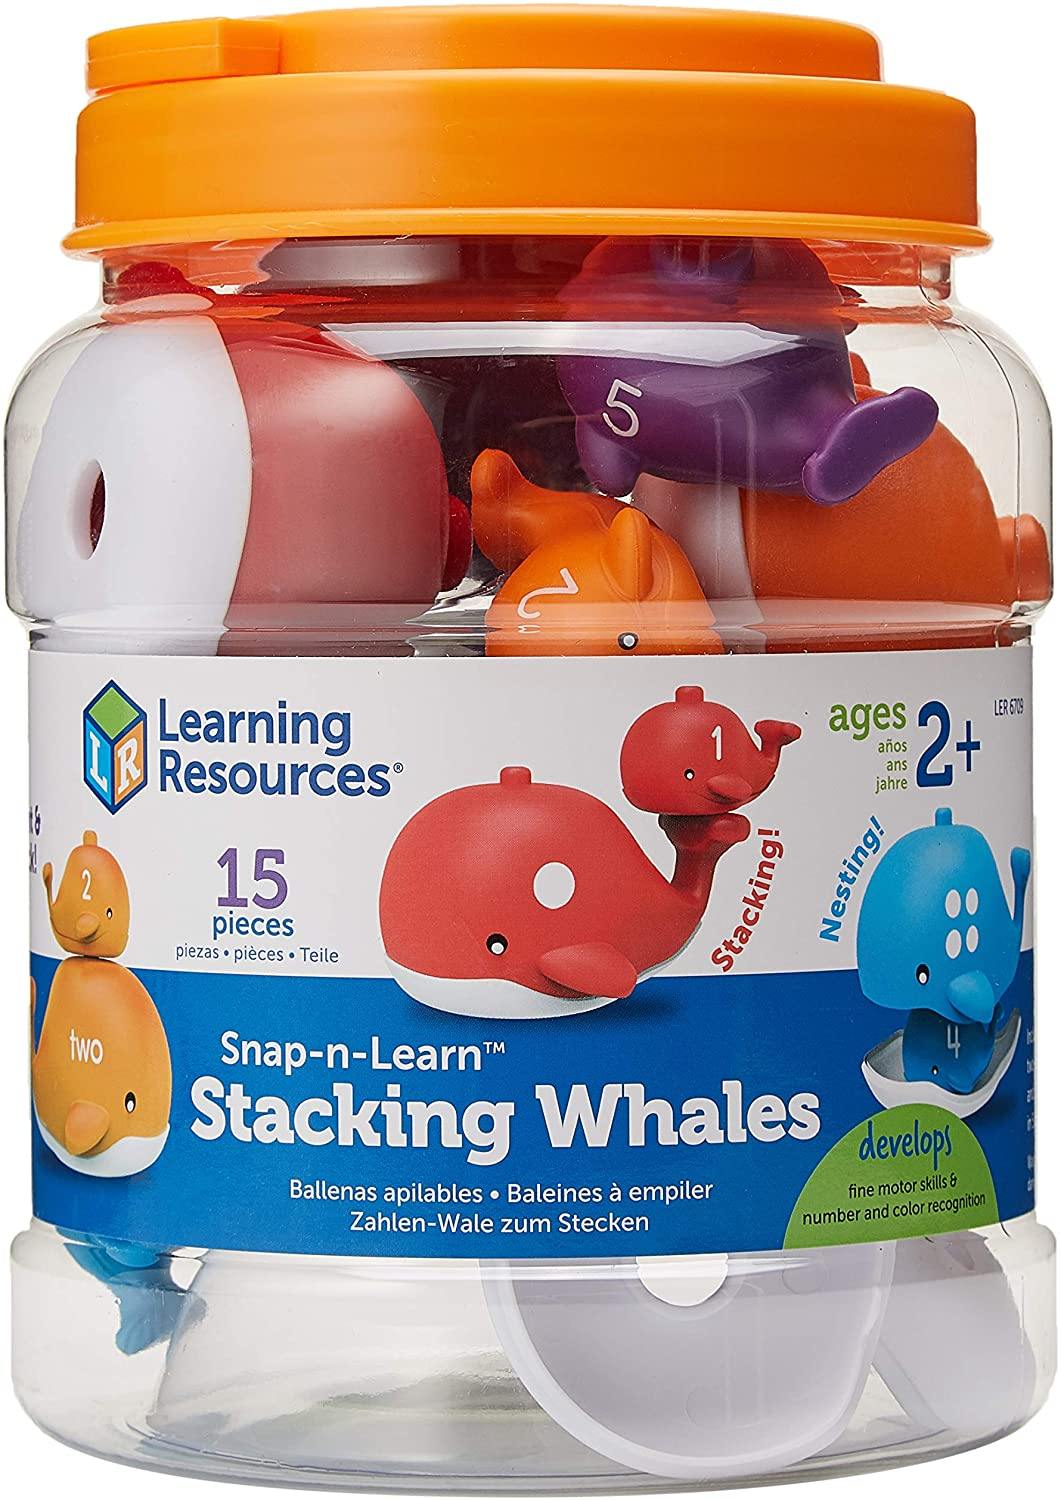 Learning Resources Snap-n-Learn Stacking Whales - Yachew